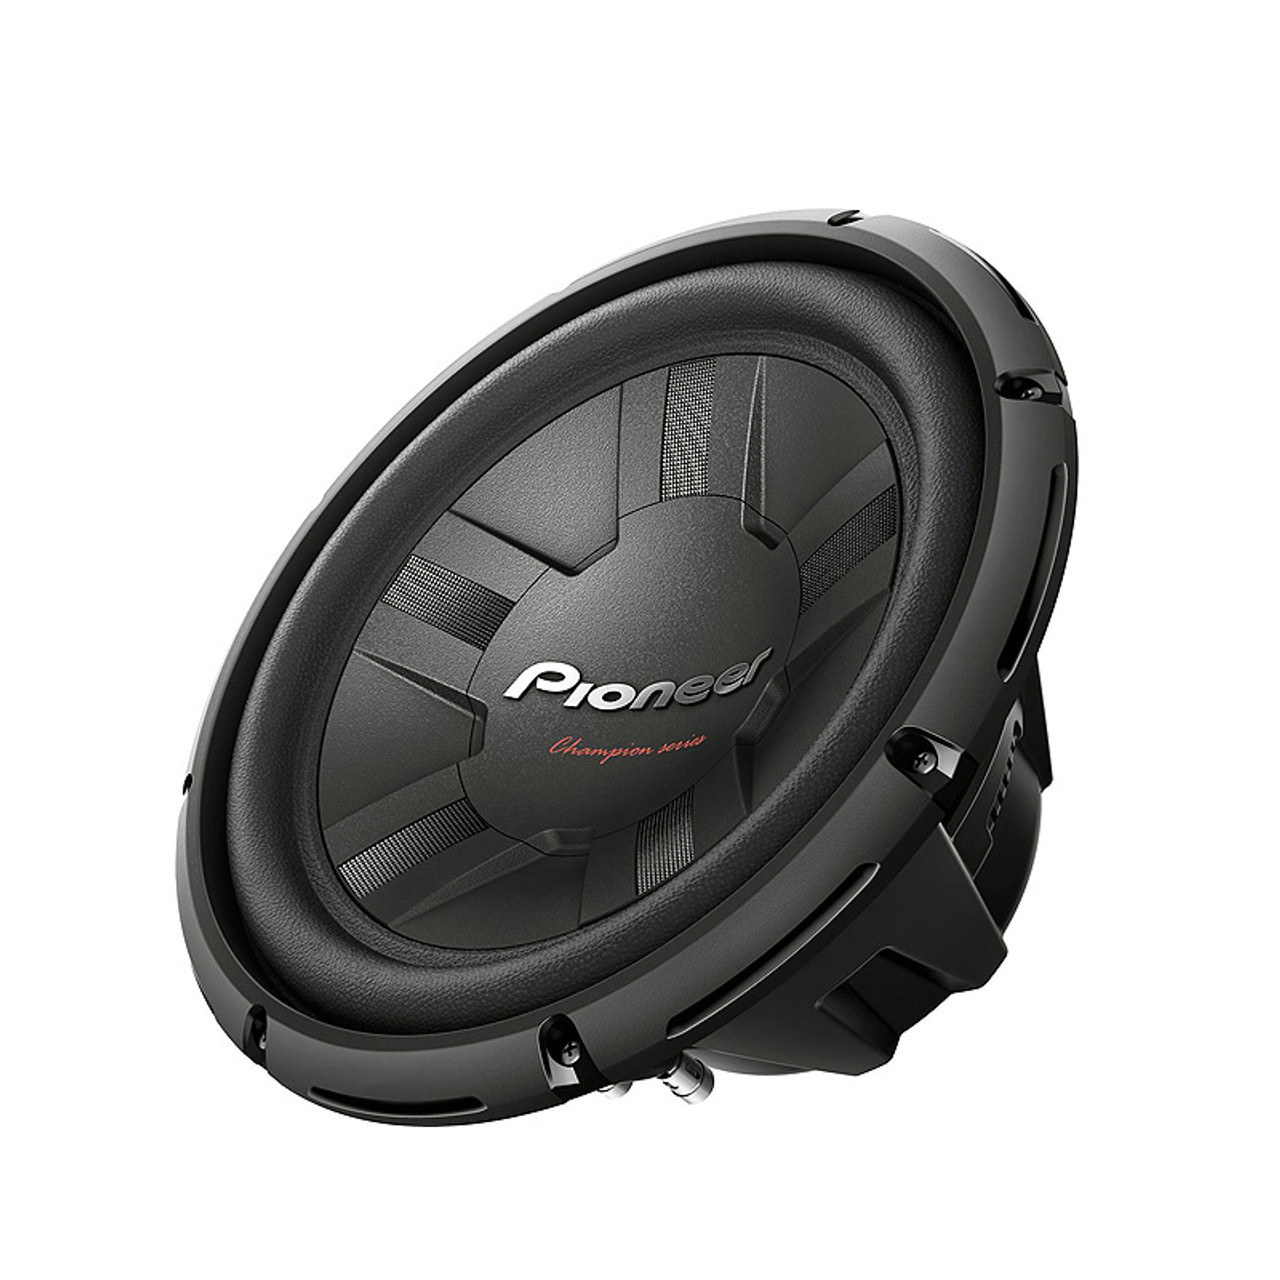 Pioneer TS-W311D4 12" Champion Series Dual 4 ohm Car Subwoofer